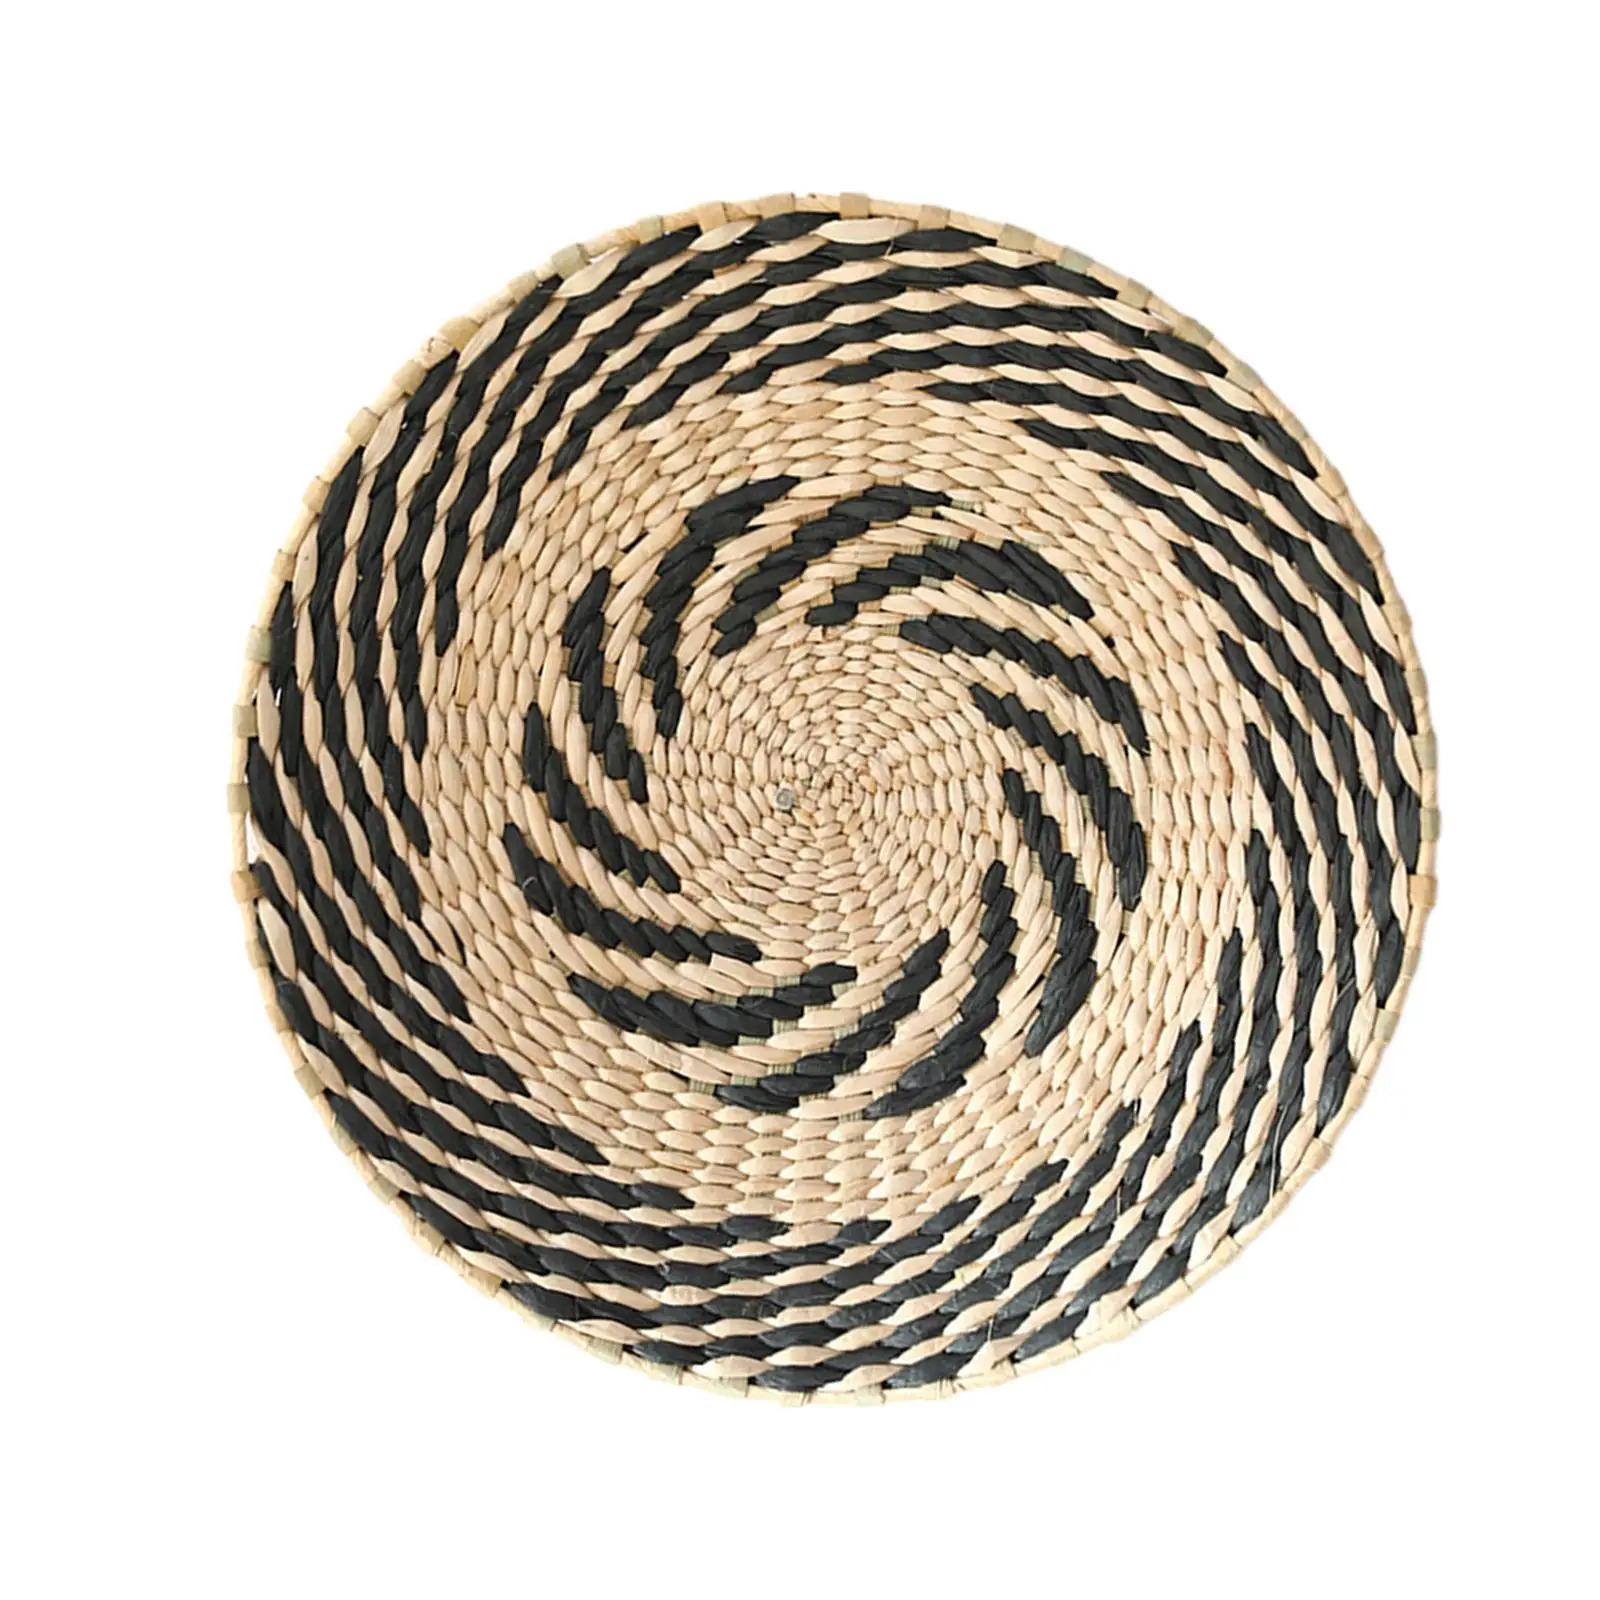 Handmade Wall Decor Hanger Grass Outdoor Round Hanging Tapestry Weave Pattern Decoration for Coffee Table Patio Kitchen Wall